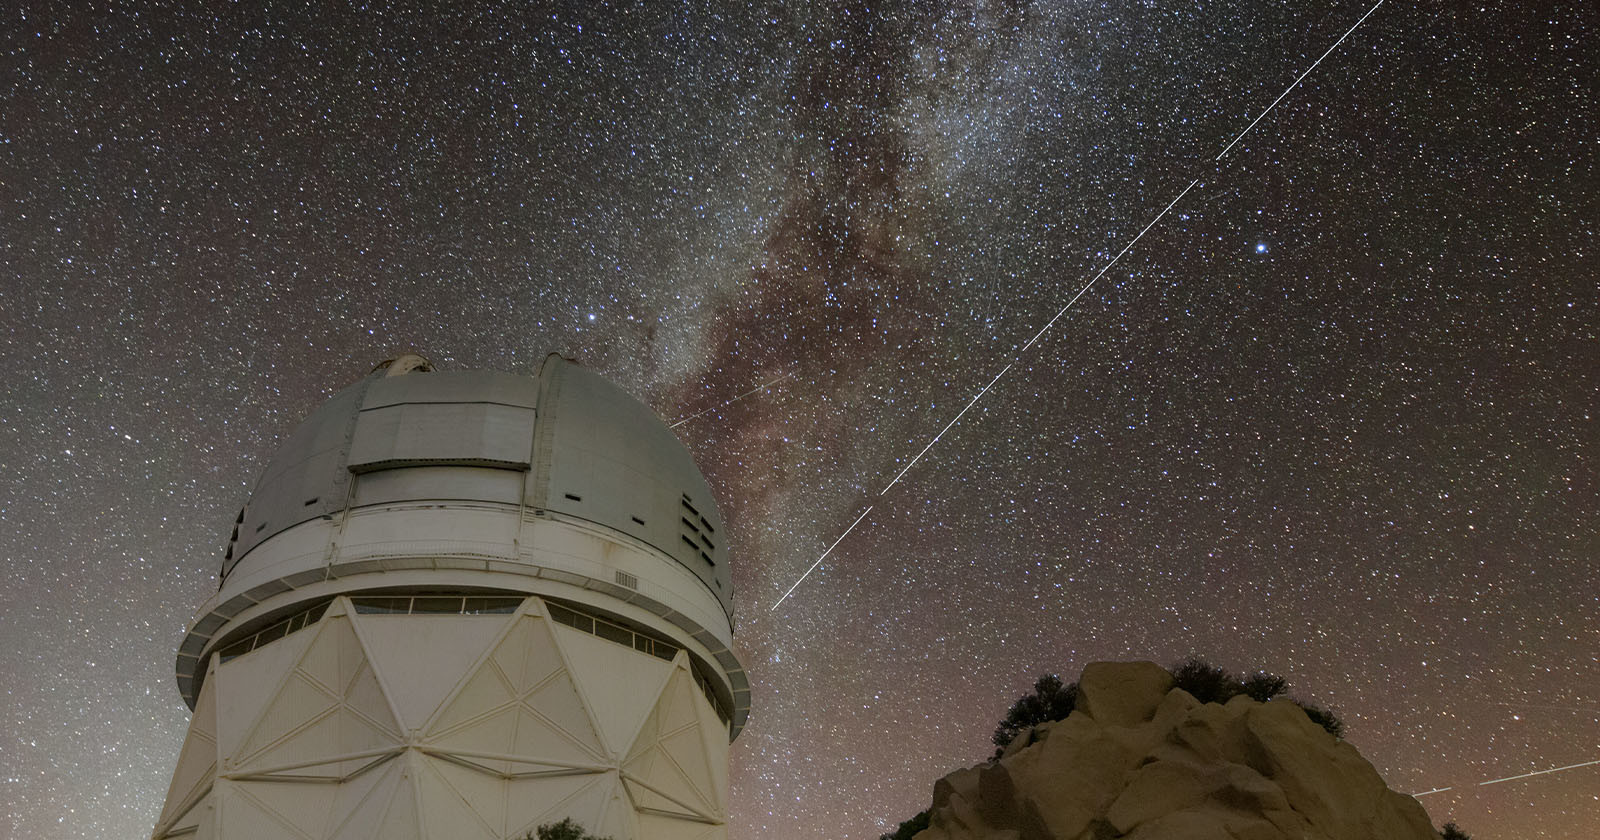 Huge Satellite Threatens to Obscure Photographers View of the Night Sky